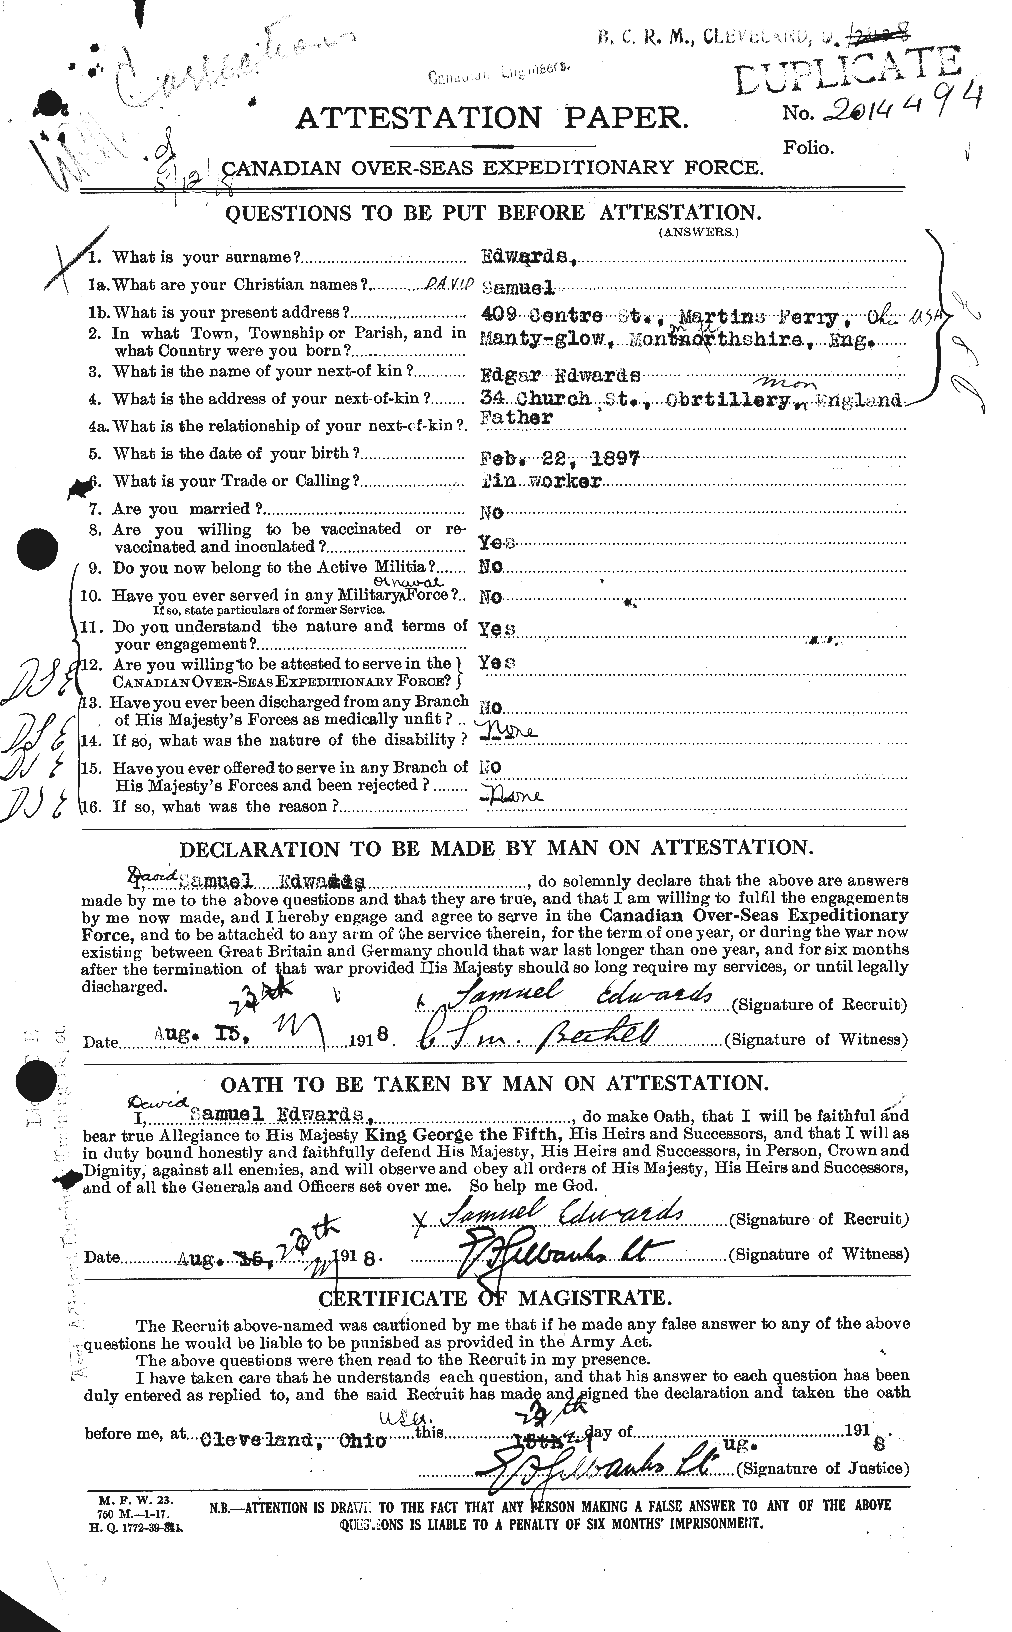 Personnel Records of the First World War - CEF 307882a